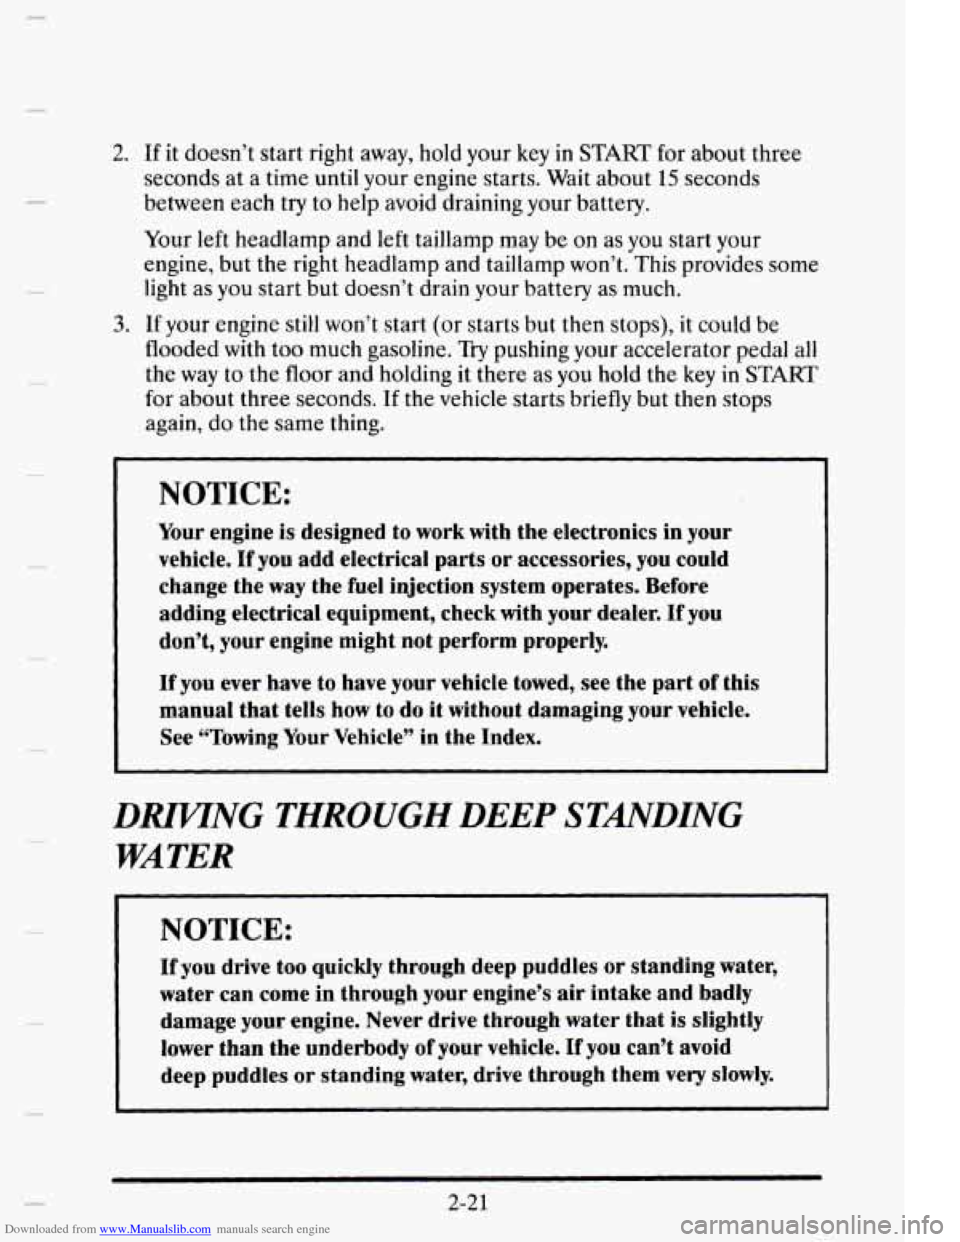 CADILLAC ELDORADO 1995 10.G Owners Manual Downloaded from www.Manualslib.com manuals search engine 2. If it doesn’t  start right  away,  hold your  key in START for  about  three 
seconds  at a  time  until  your engine  starts.  Wait about